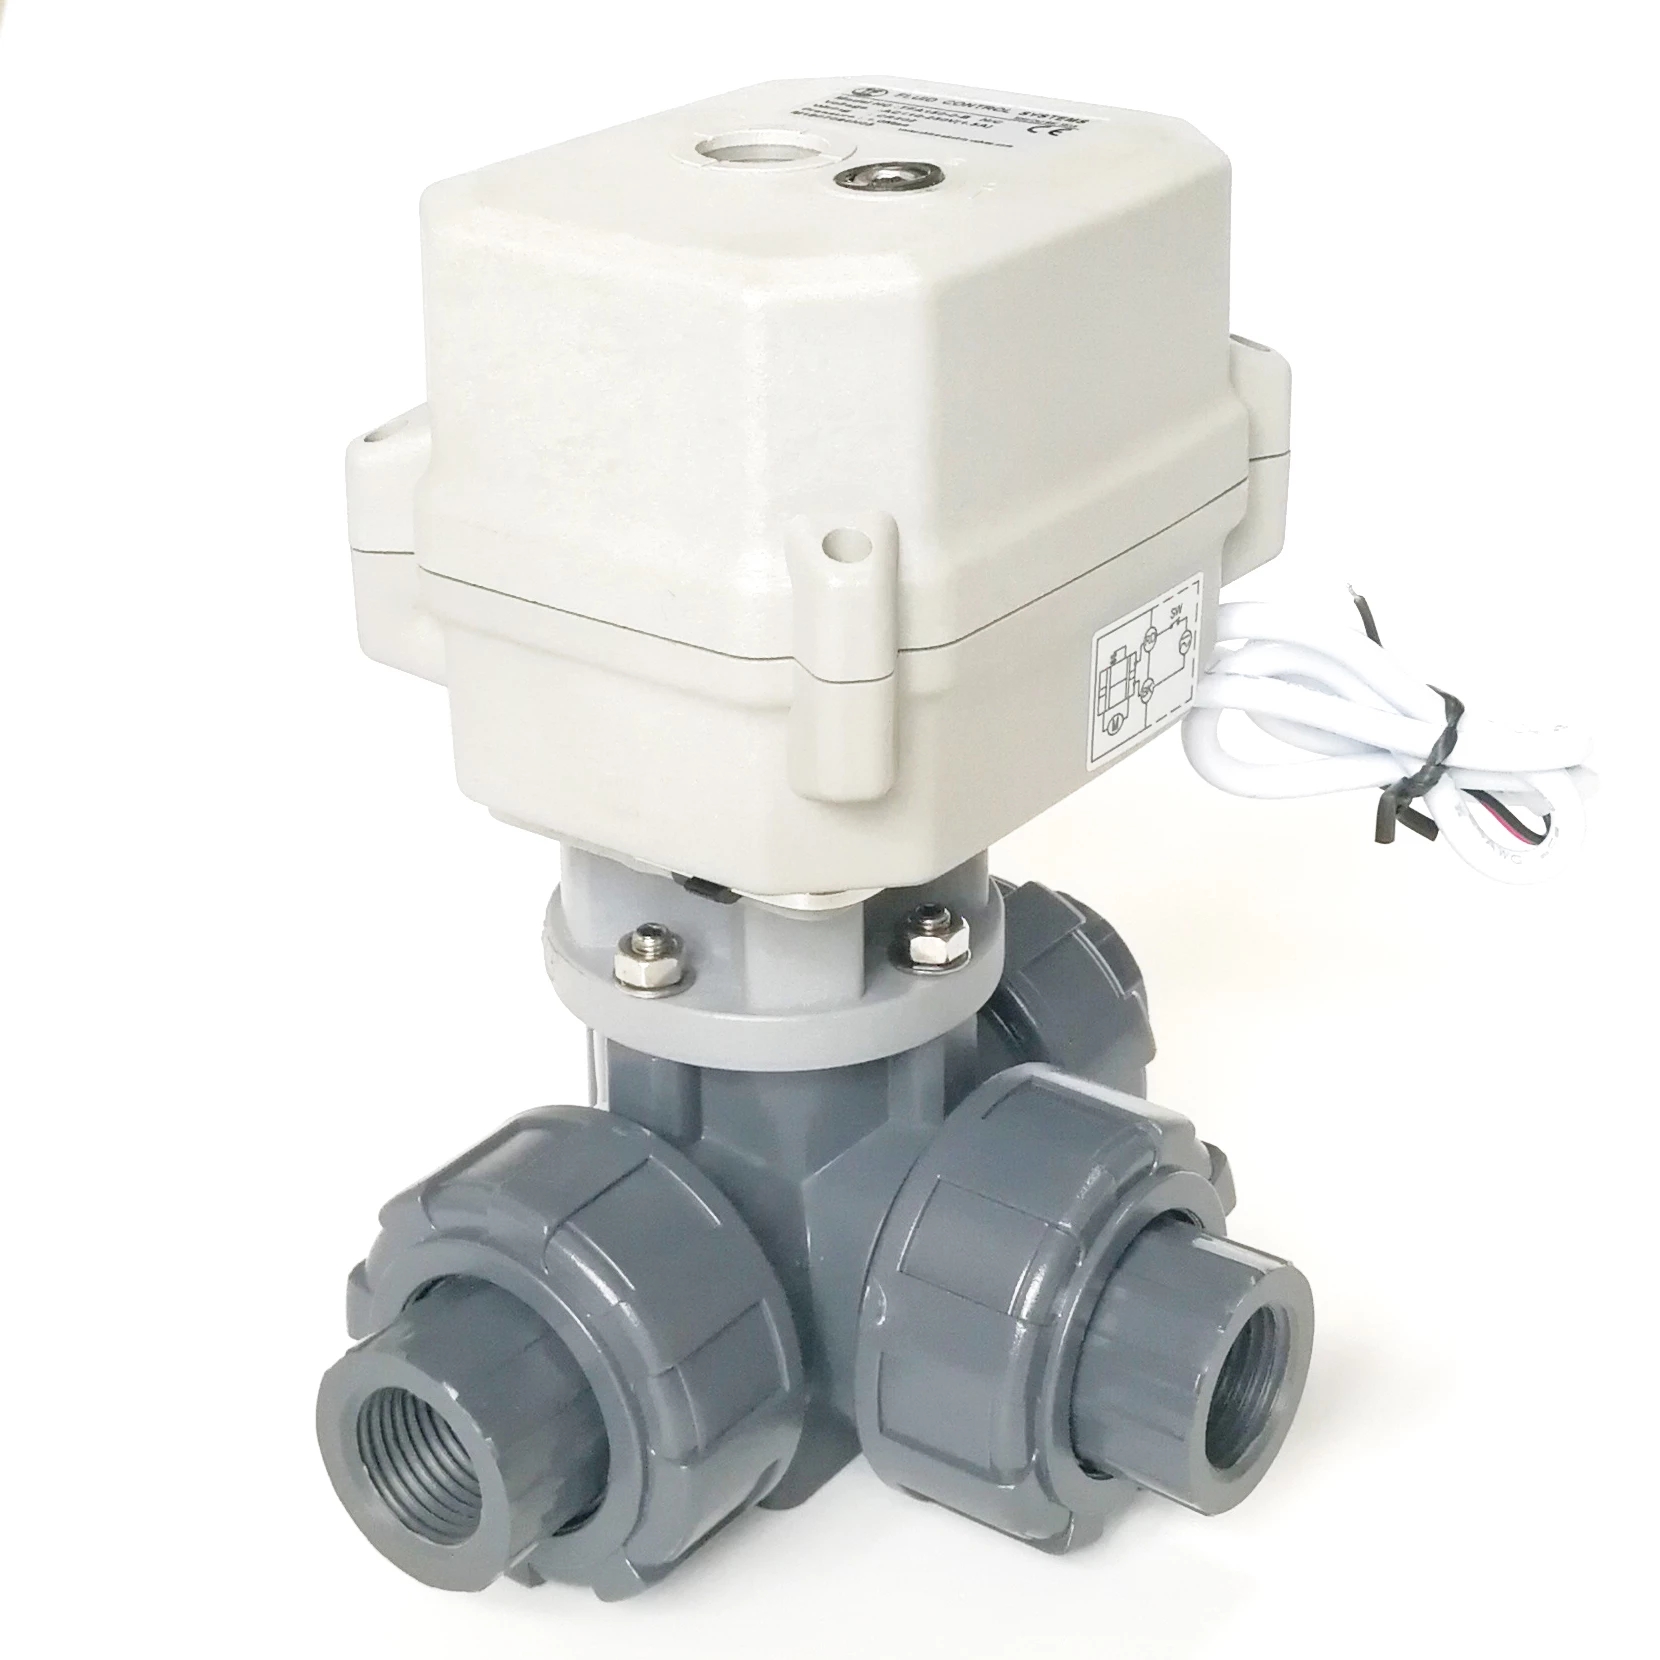 1 inch 3 WAY Electric Plastic ball valve with actuator 15Nm with manual